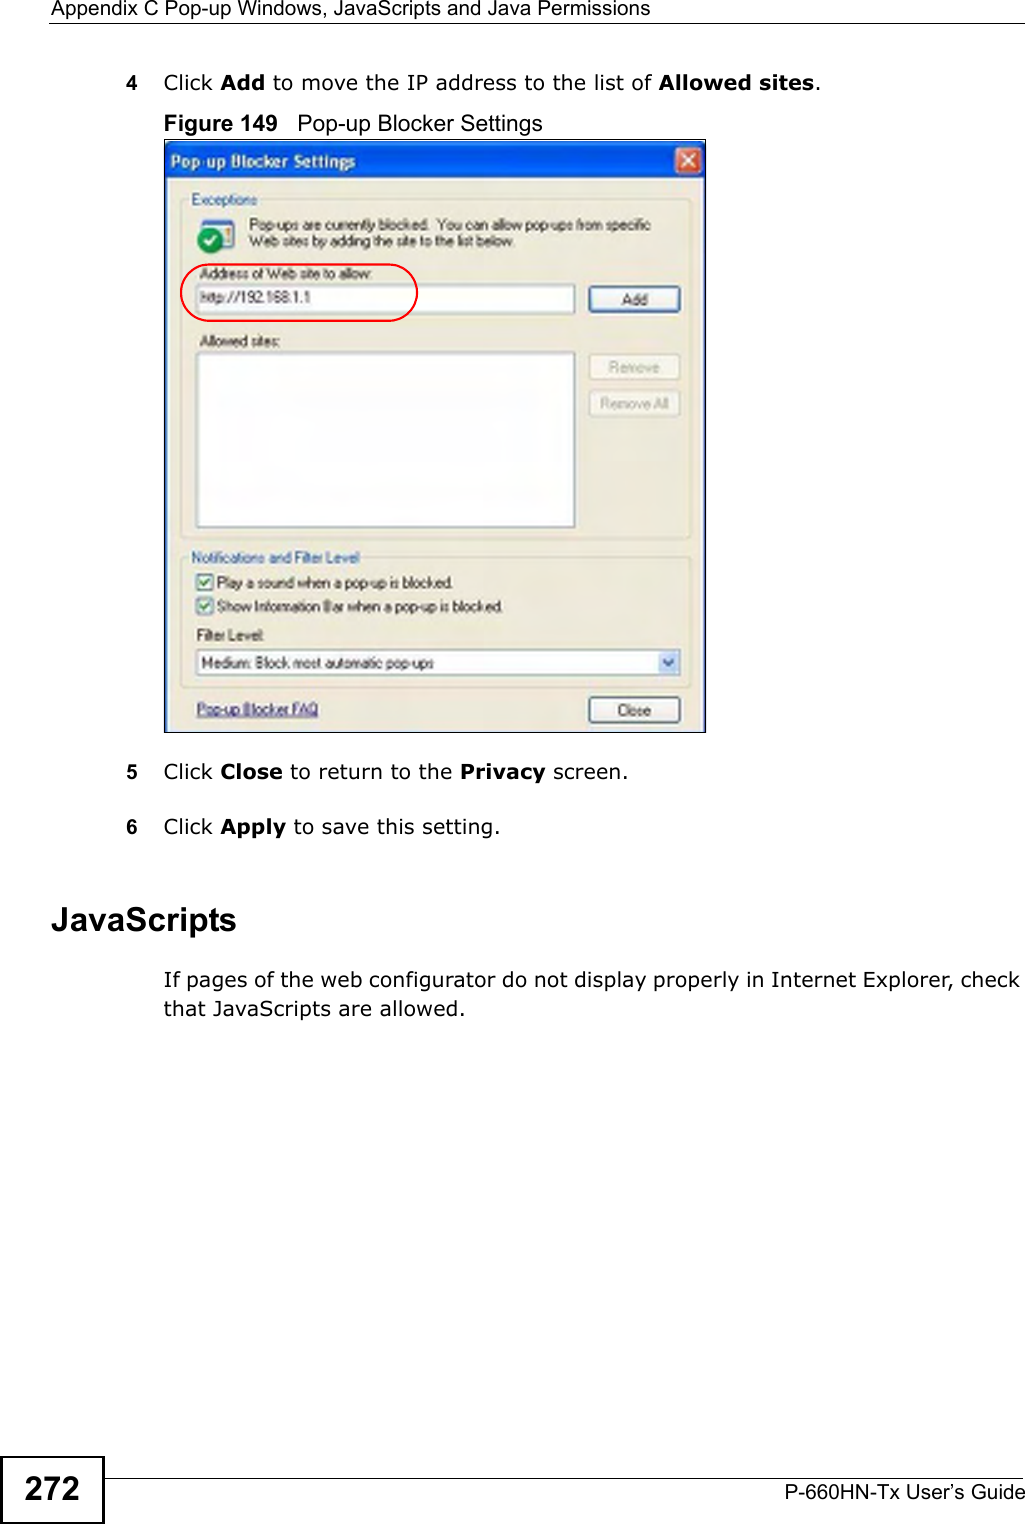 Appendix C Pop-up Windows, JavaScripts and Java PermissionsP-660HN-Tx User’s Guide2724Click Add to move the IP address to the list of Allowed sites.Figure 149   Pop-up Blocker Settings5Click Close to return to the Privacy screen. 6Click Apply to save this setting. JavaScriptsIf pages of the web configurator do not display properly in Internet Explorer, check that JavaScripts are allowed. 